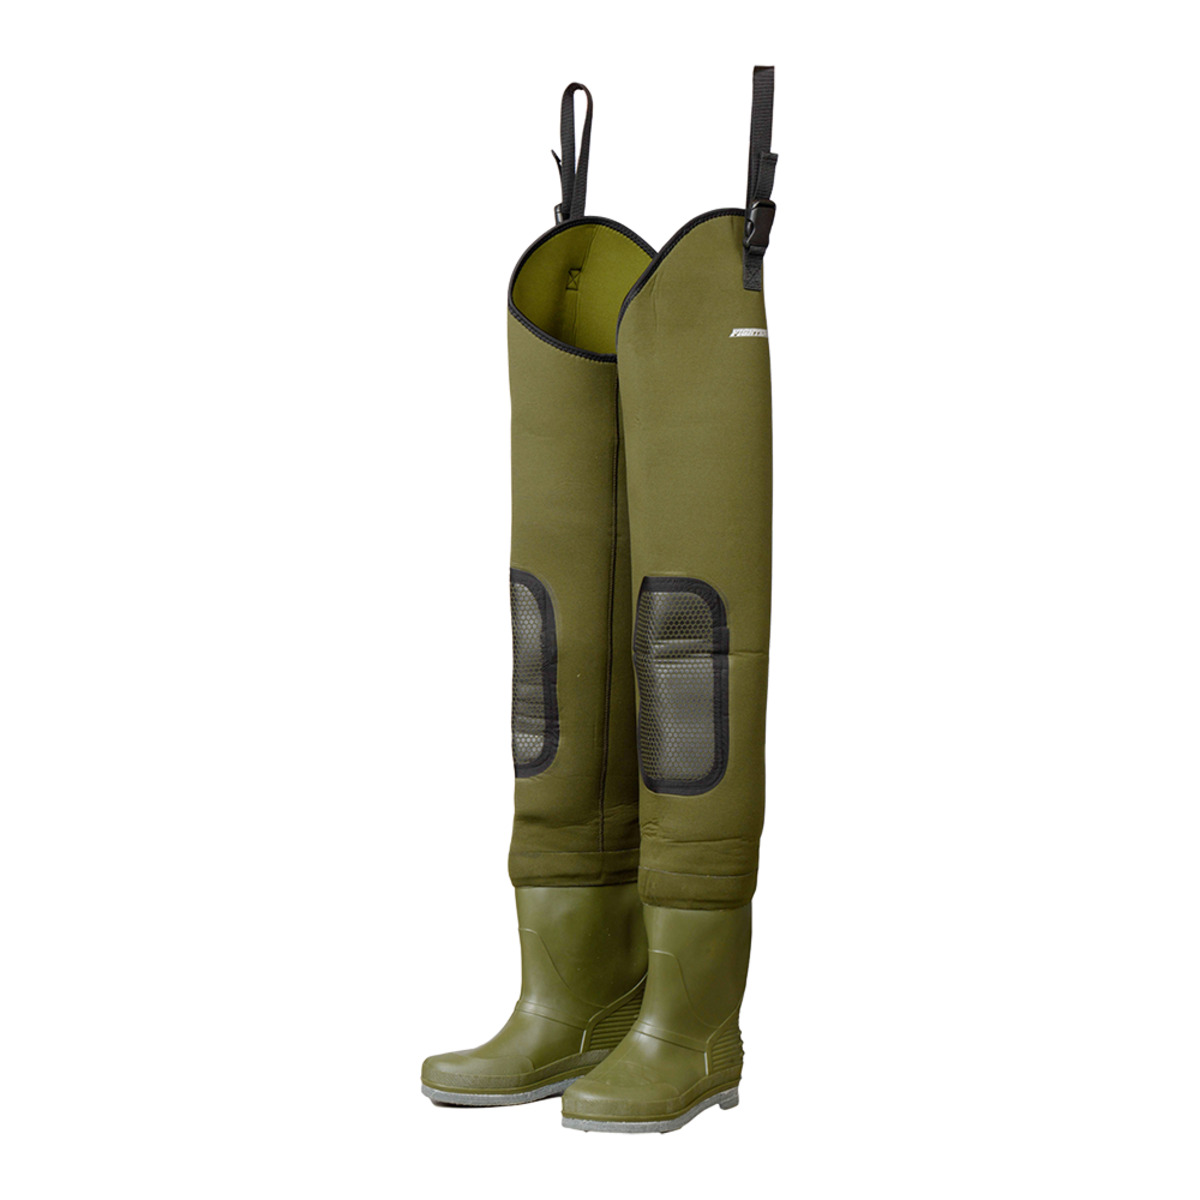 Dam Fighter Pro+ Neoprene Hip Waders Cleated Sole - 46/47